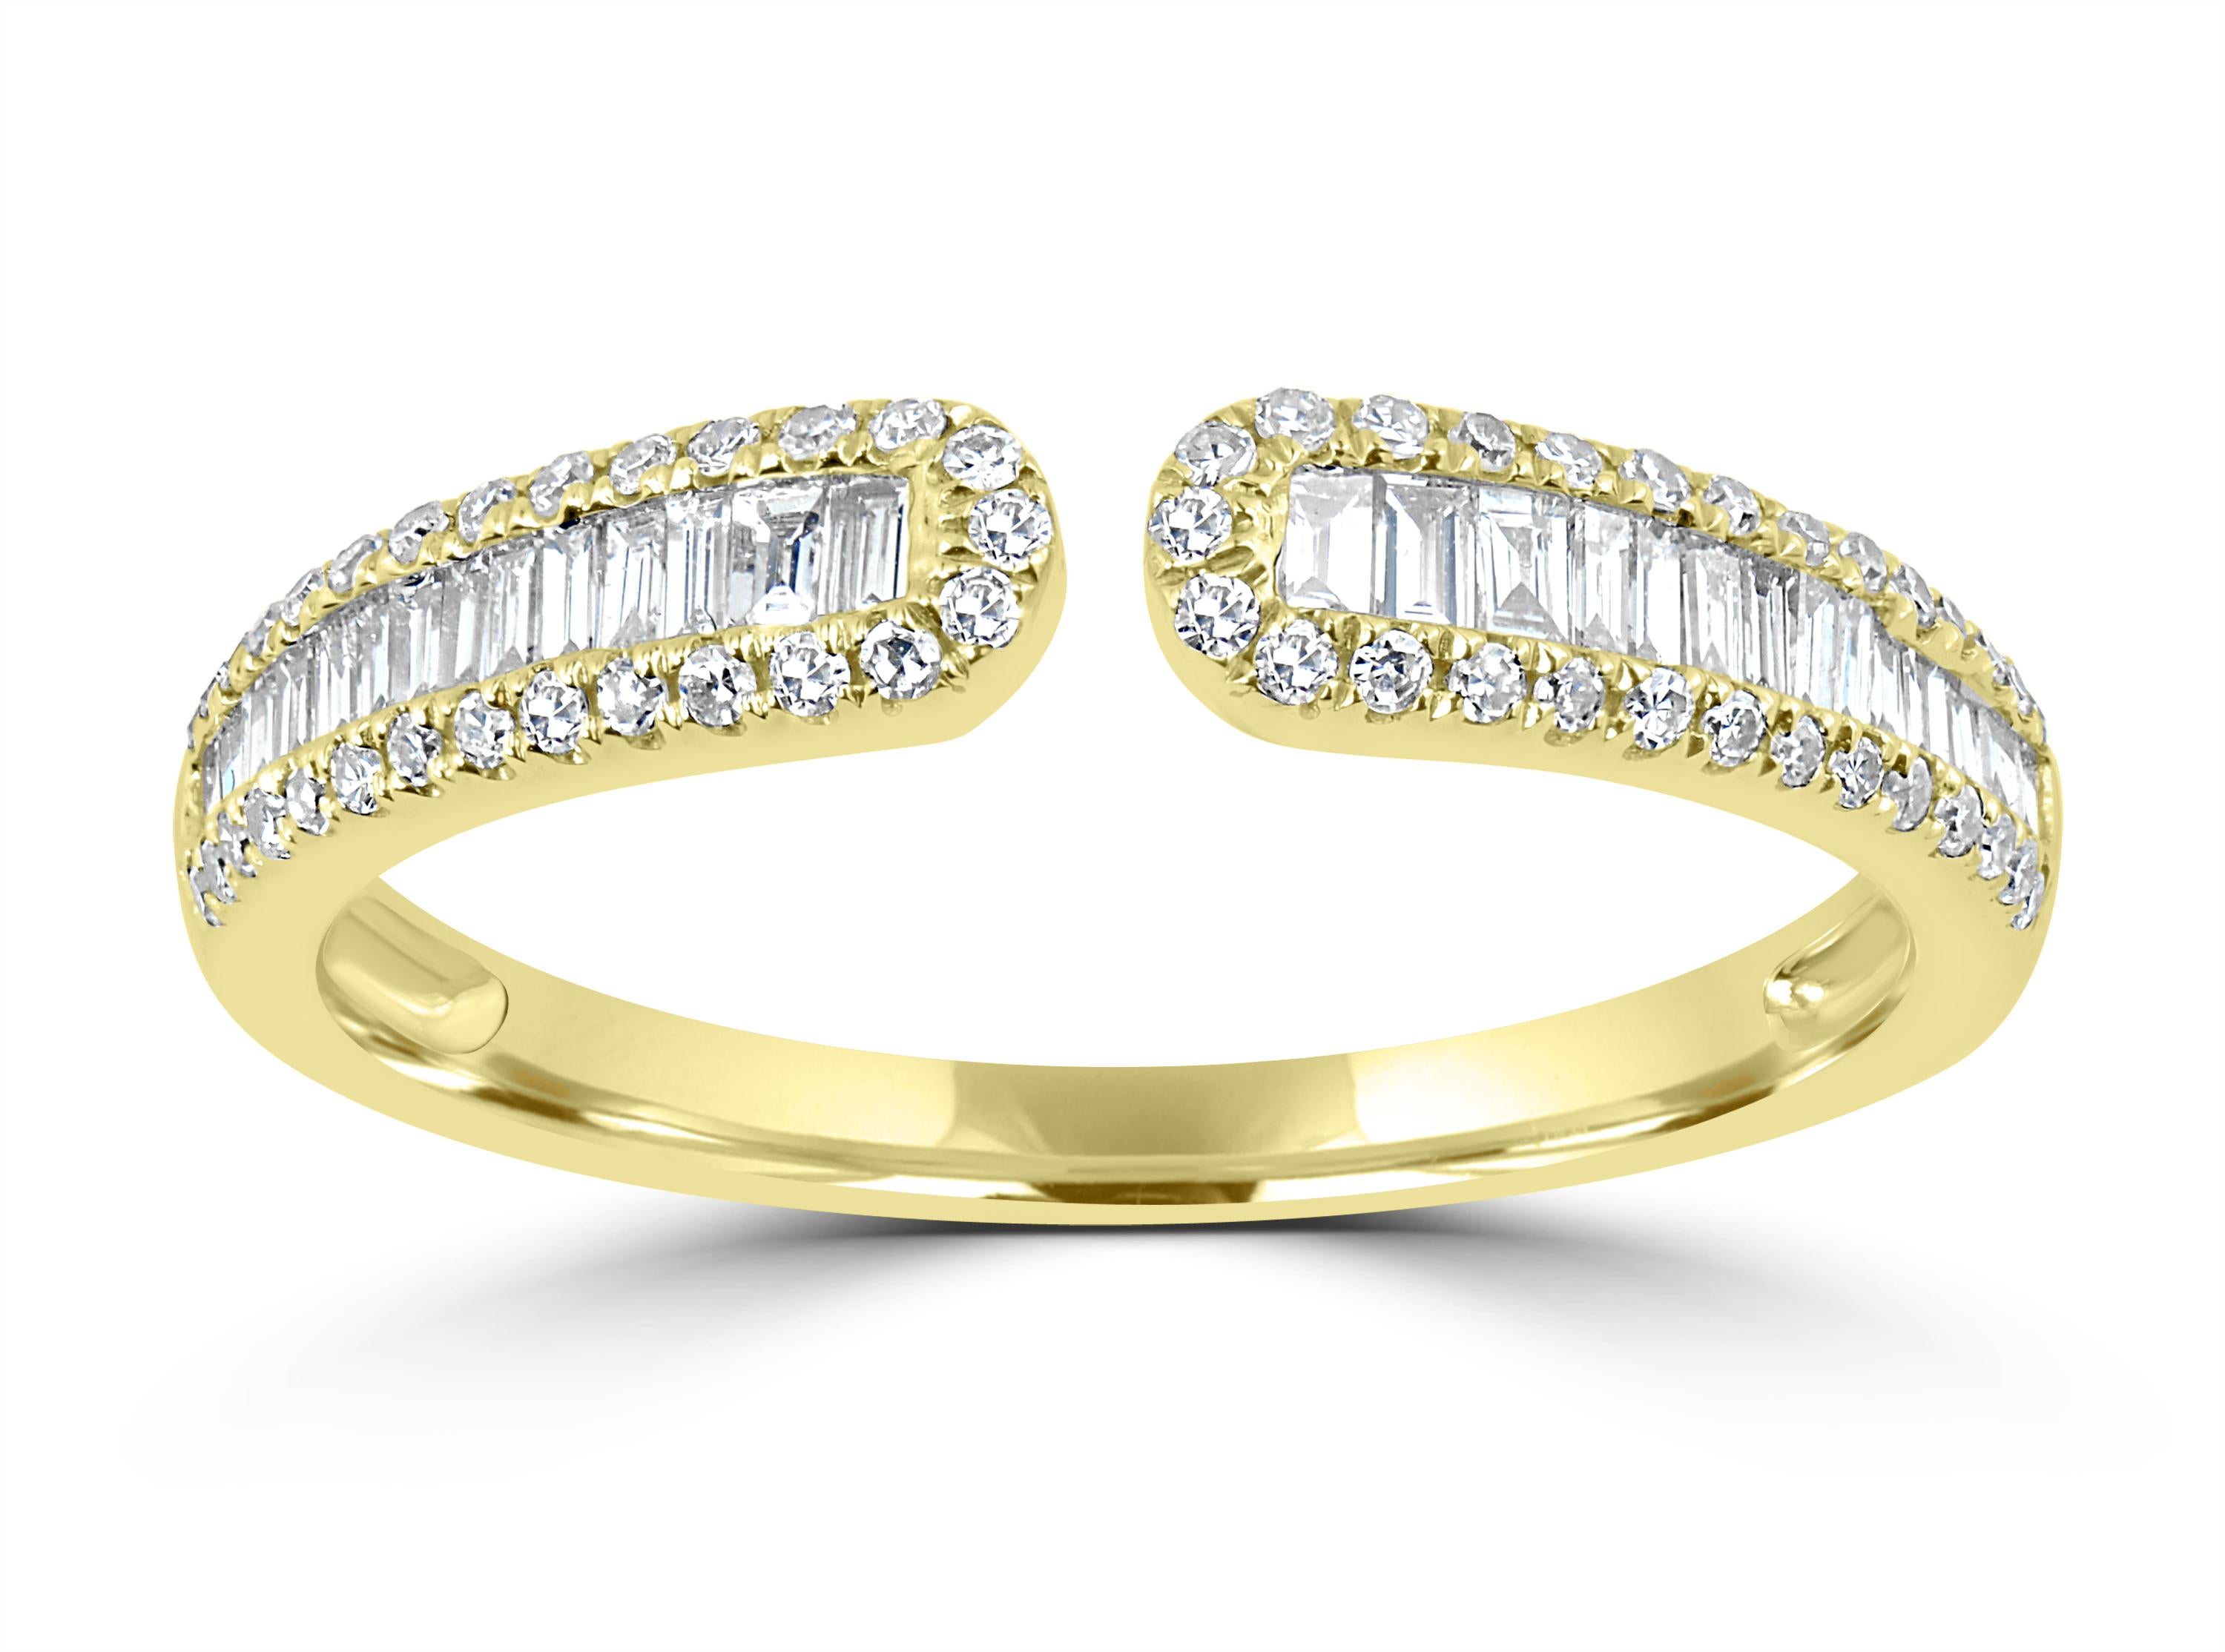 This gorgeous ring shimmer with baguettes framed in pave diamonds on either sides  in 14K yellow gold that give this piece an elegant vibe that you will adore.

JEWELRY SPECIFICATION:
Approx. Gold Weight: 2.06 gram
Approx. Diamond Weight: 0.30